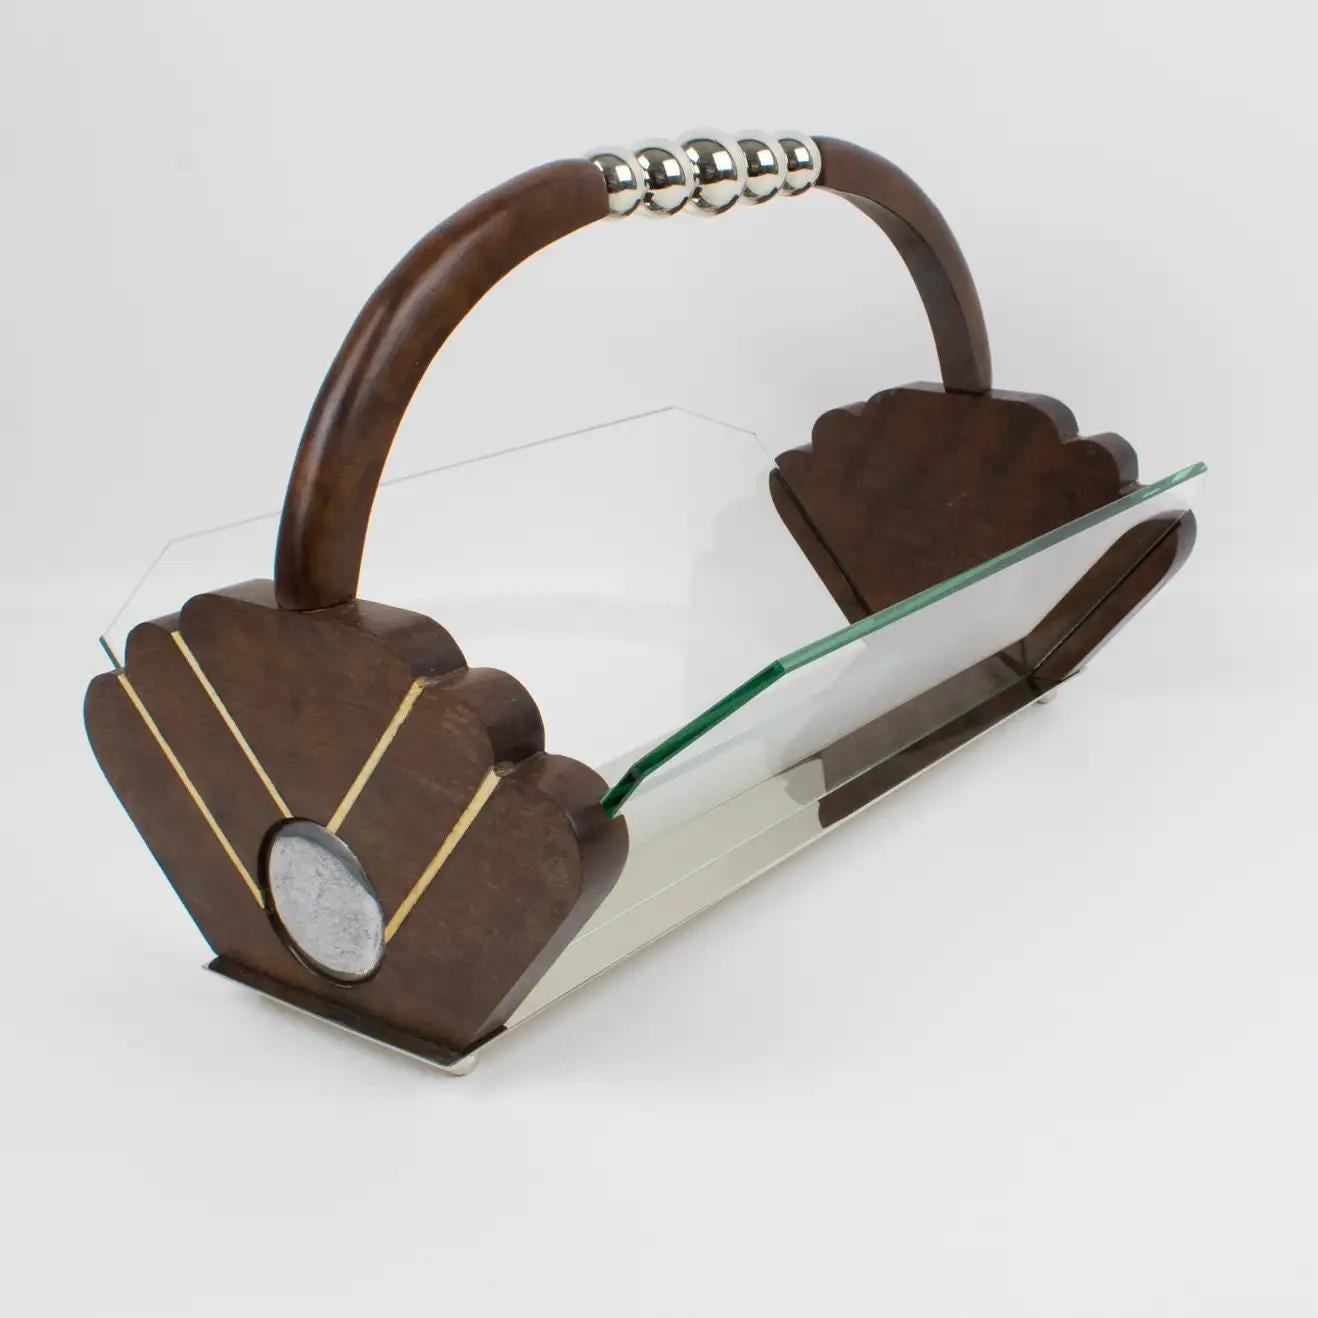 This stylish Art Deco centerpiece, serving bowl, or decorative fruit or bread basket was designed in France circa the 1930s. The serving piece features a wood handle ornate with chromed metal beads. The sides are built in wood with chromed metal